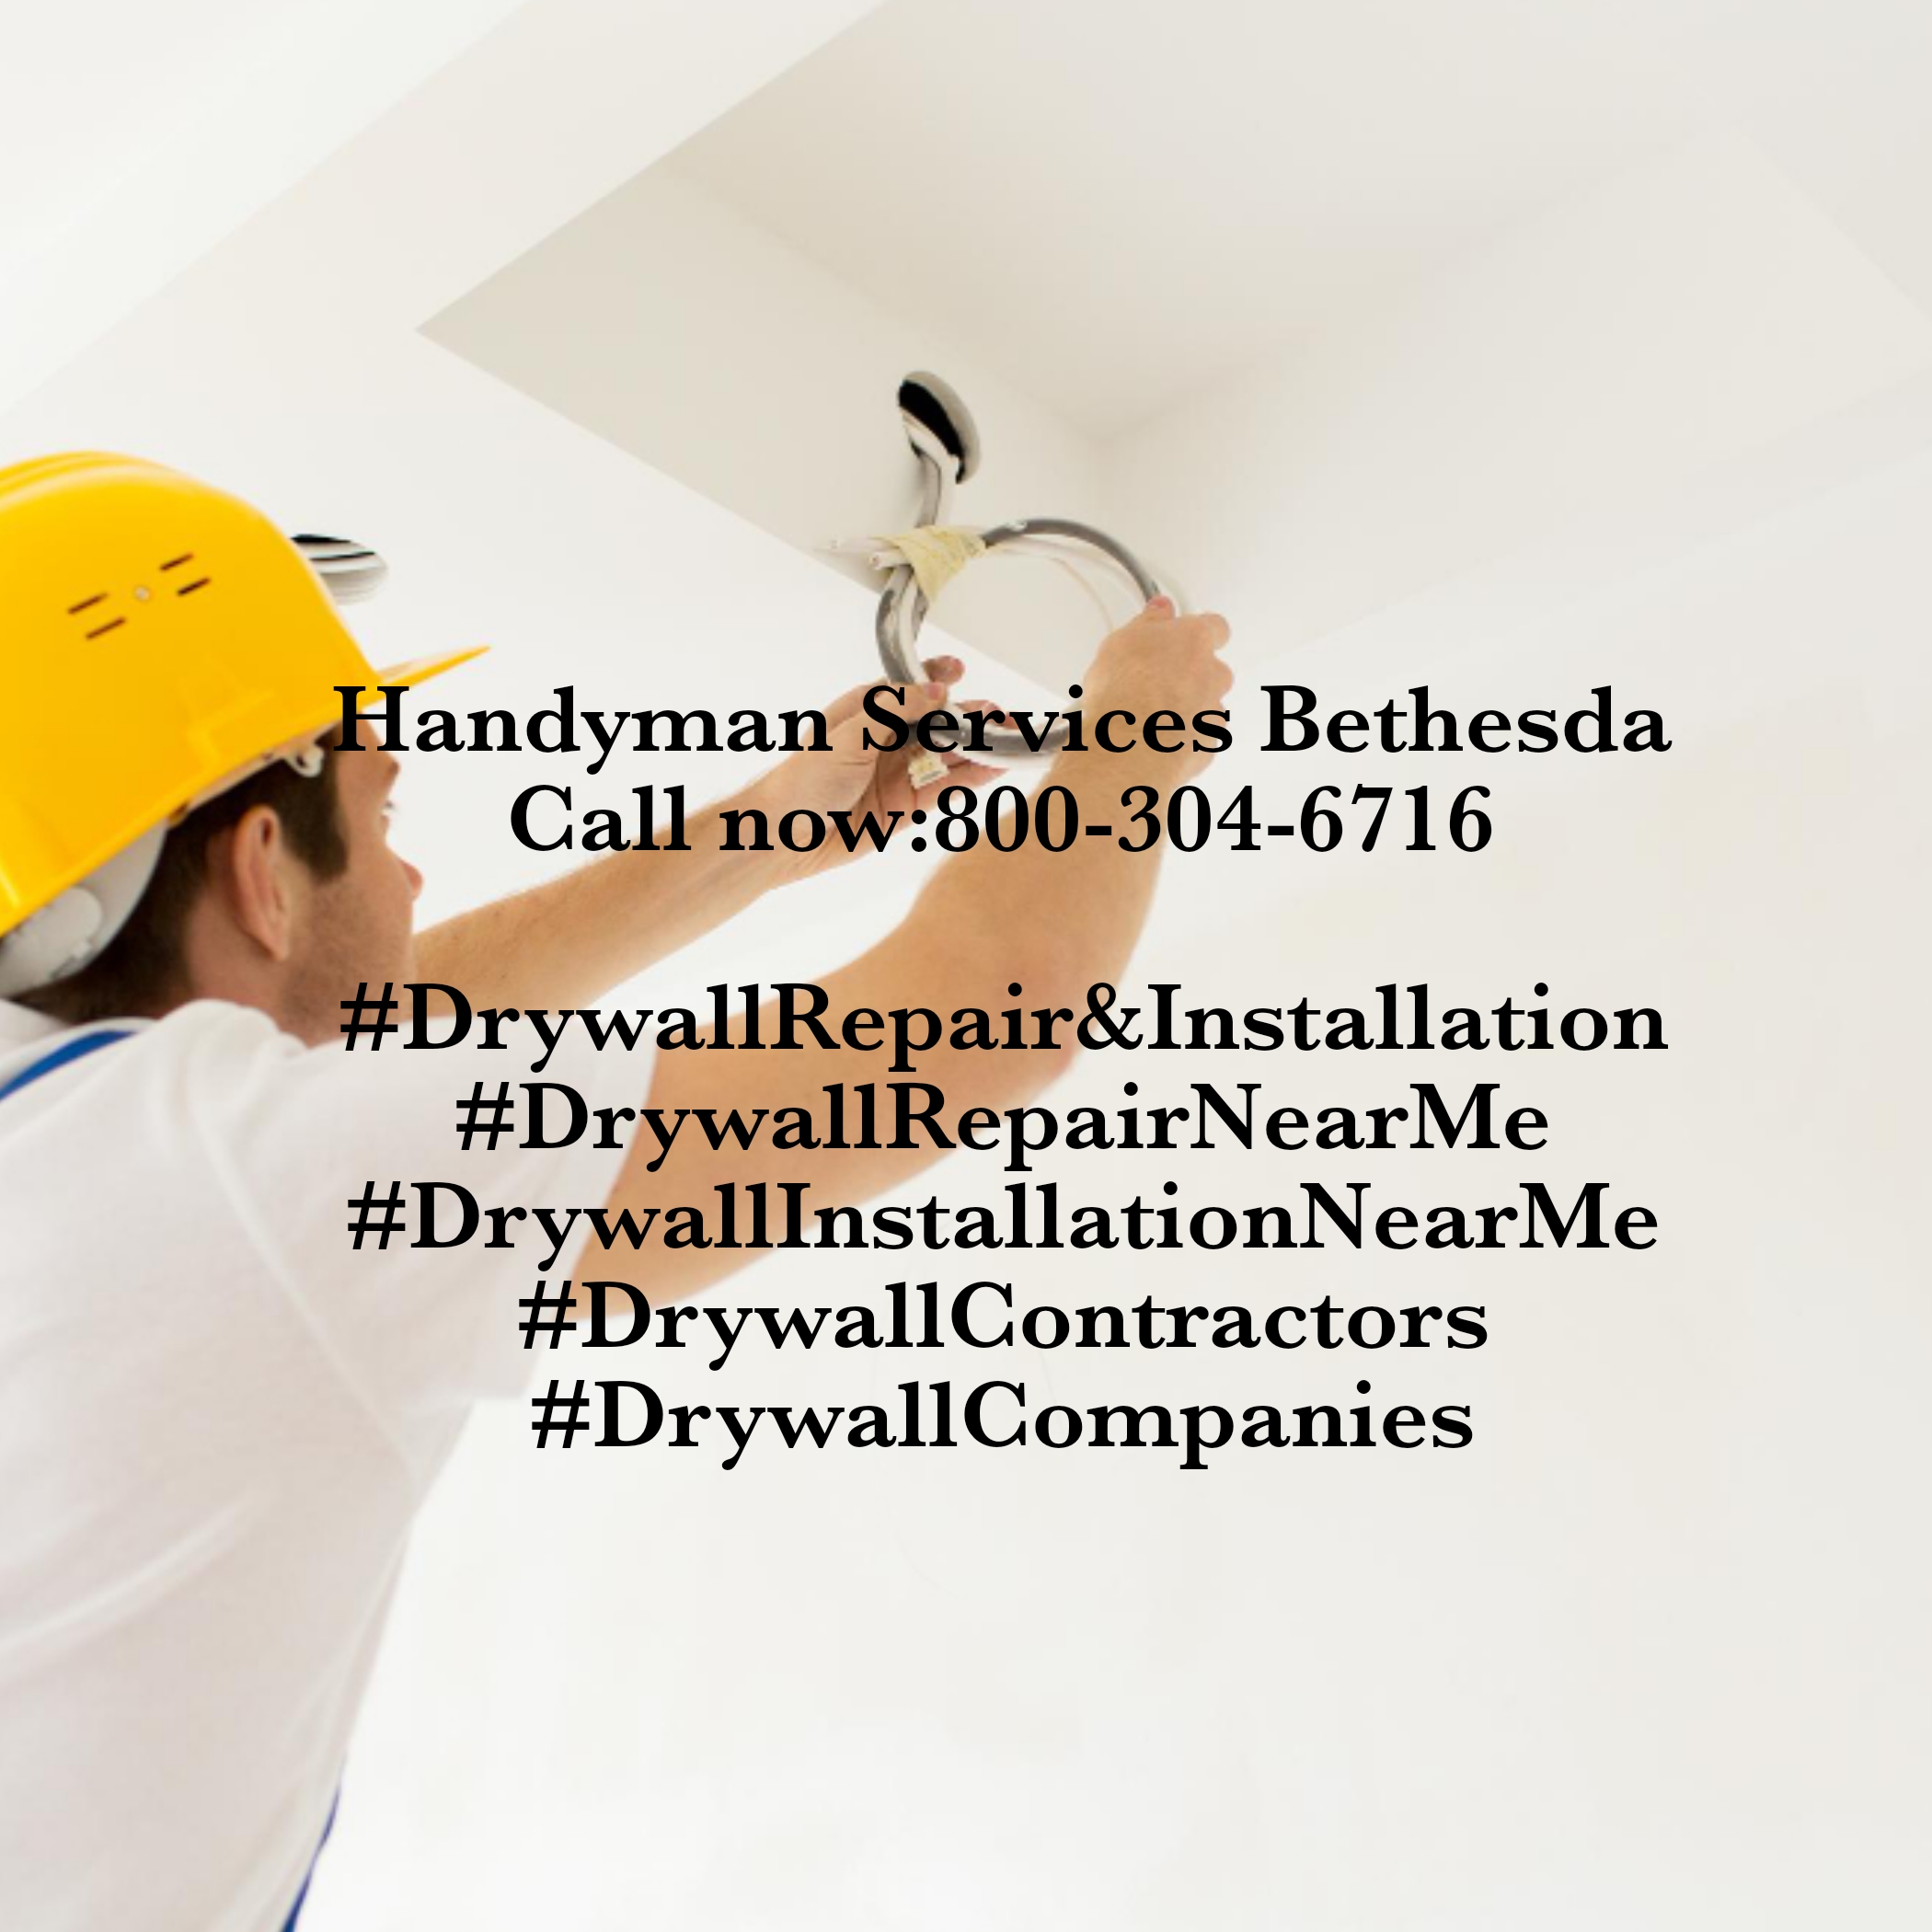 Top reasons why require drywall repair & installation service?